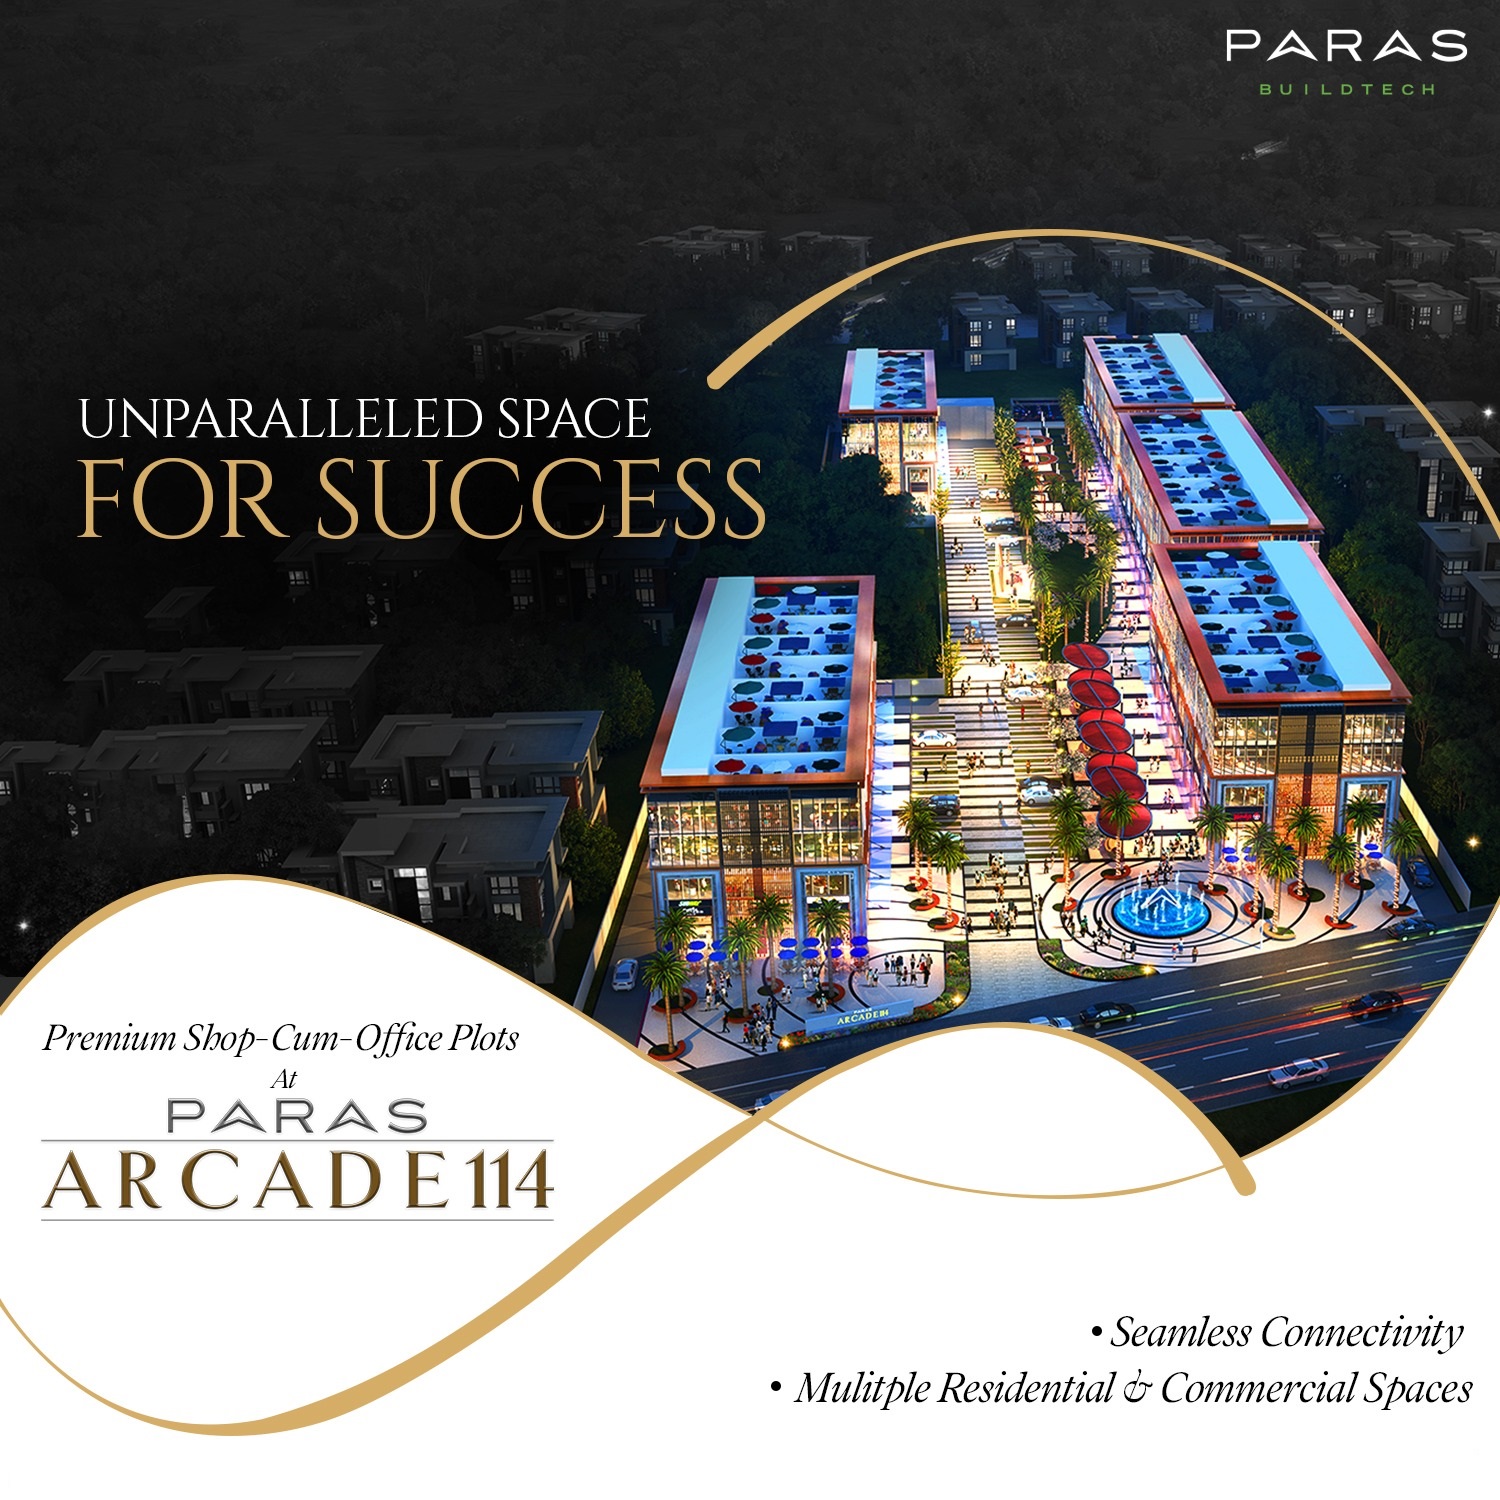 Paras Arcade 114: The New Commercial Heartbeat in Gurugram Update